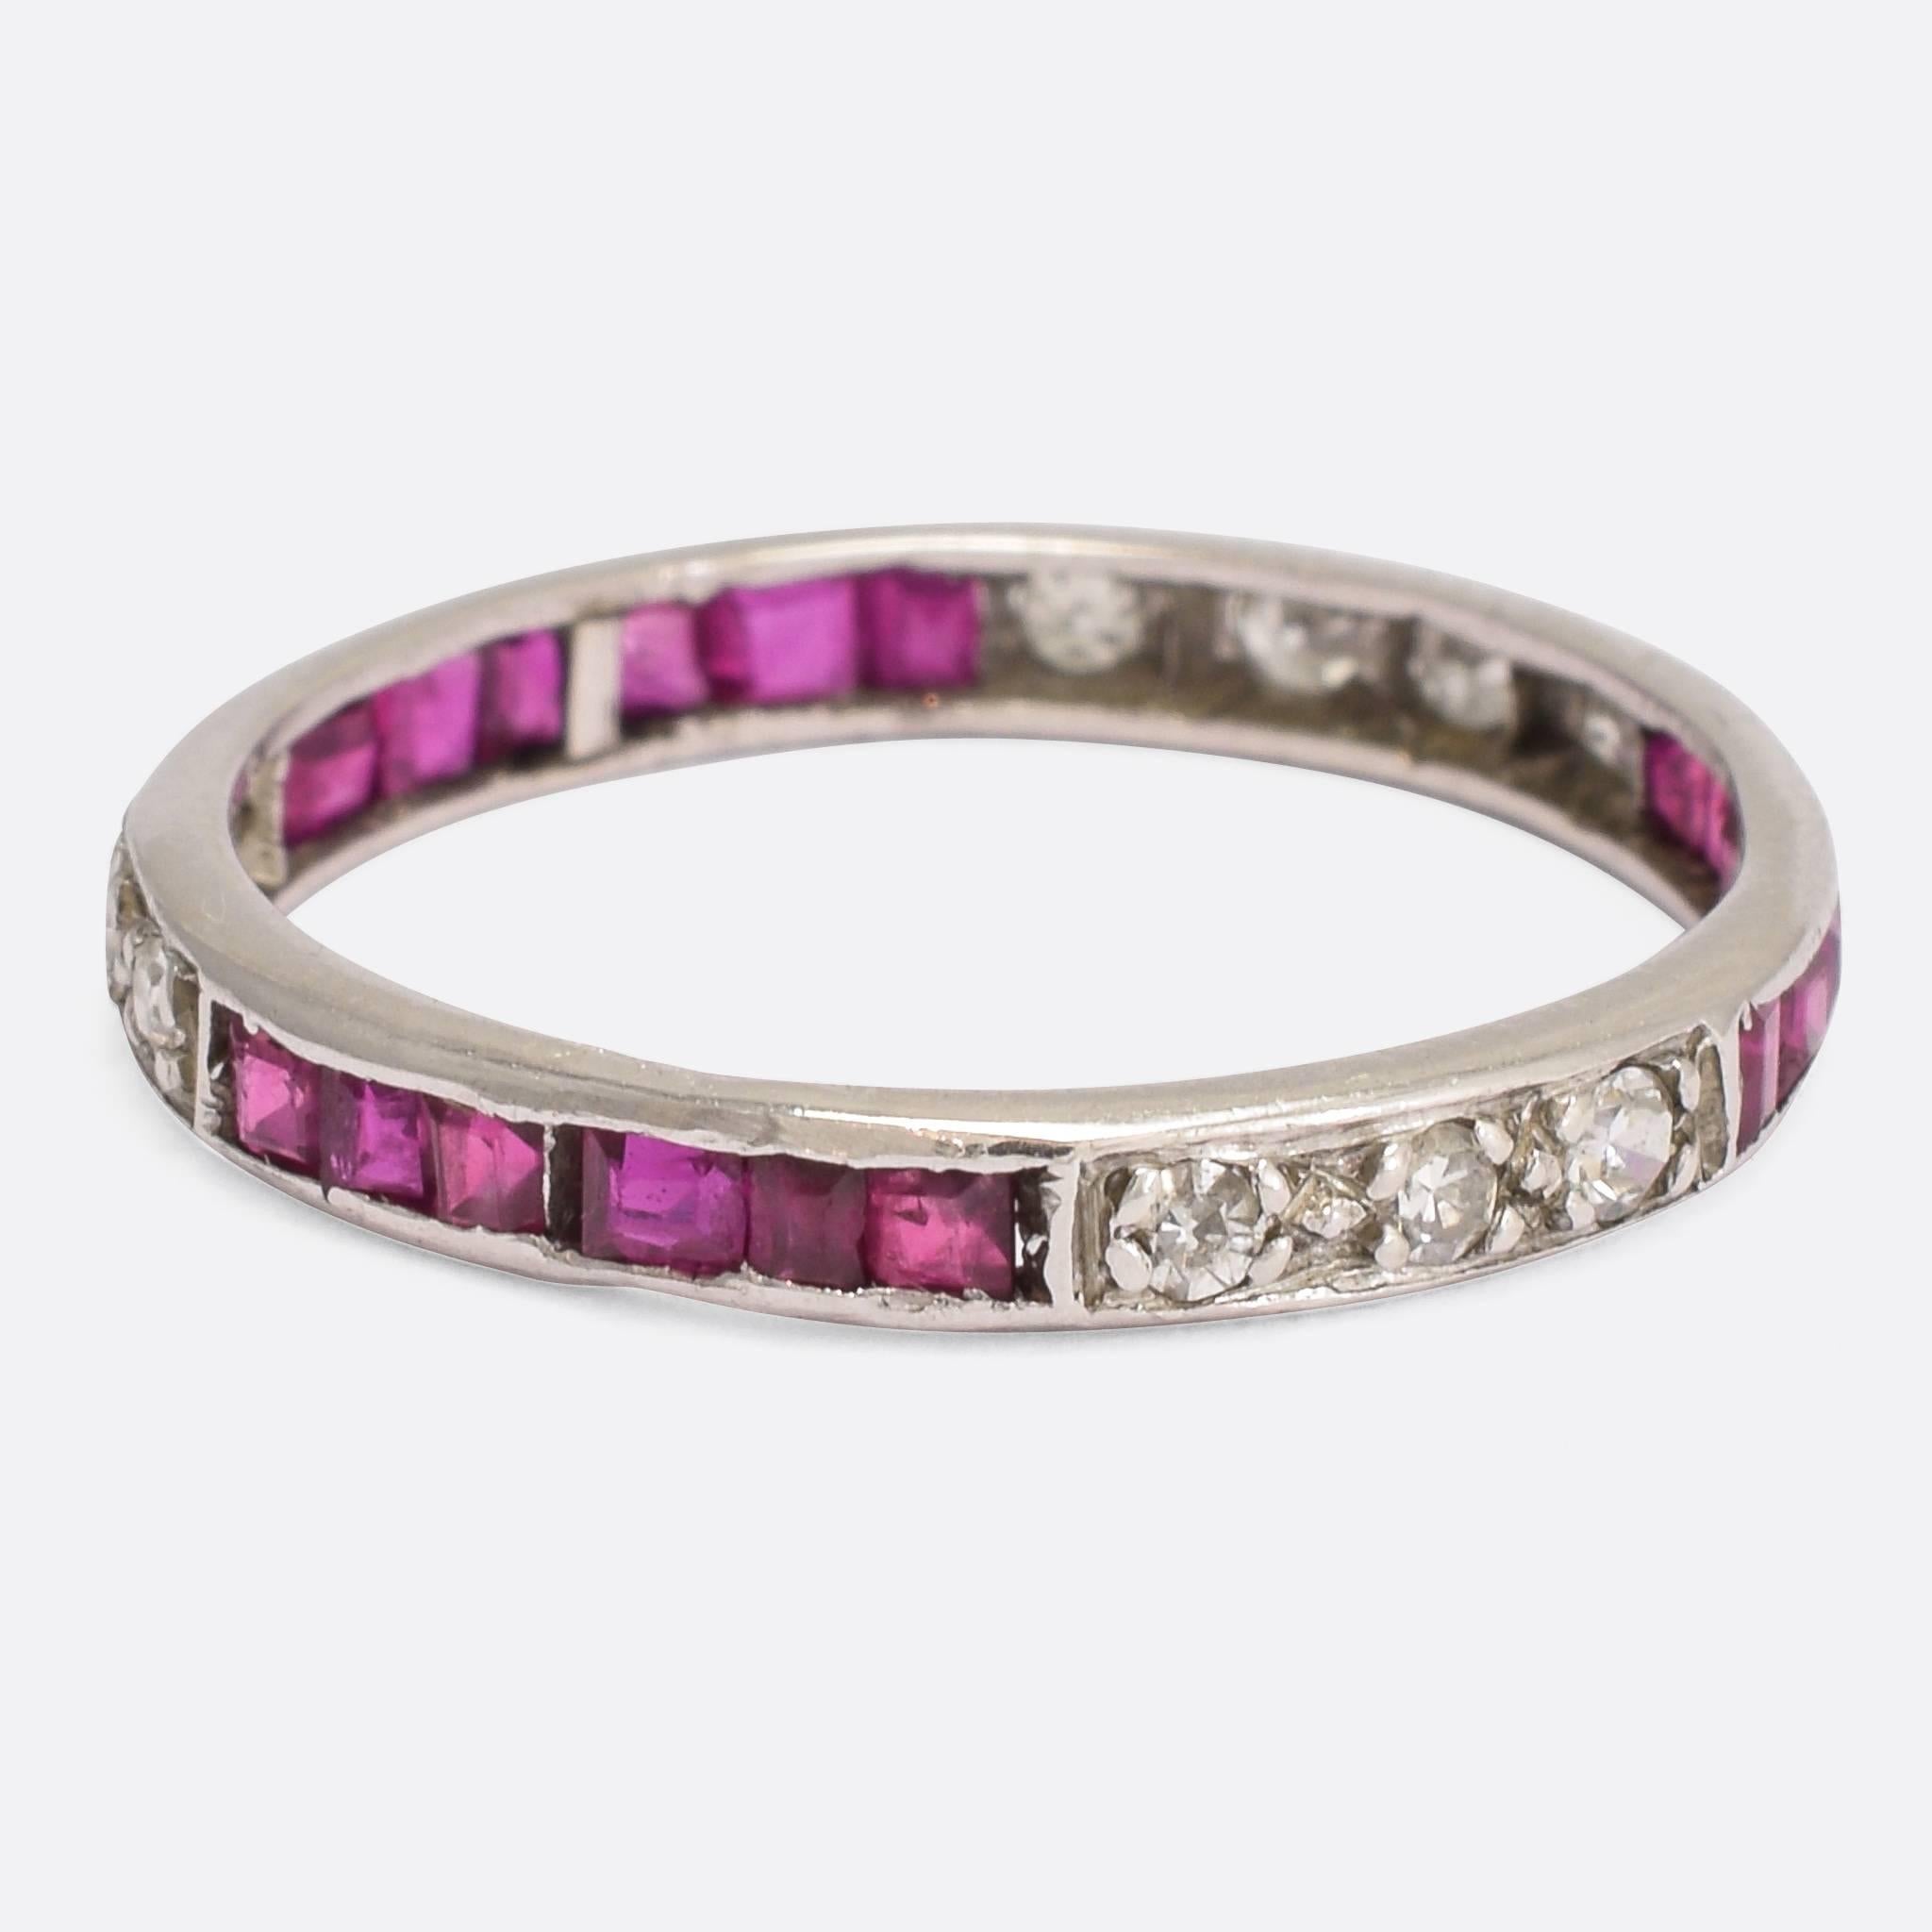 An elegant Art Deco period Eternity ring, channel set with alternation sections of rubies and diamonds. It's modelled in platinum throughout, and a good size 6.5 US.

STONES
Natural Rubies and Diamonds

RING SIZE
6.5 US

MEASUREMENTS
Width of band: